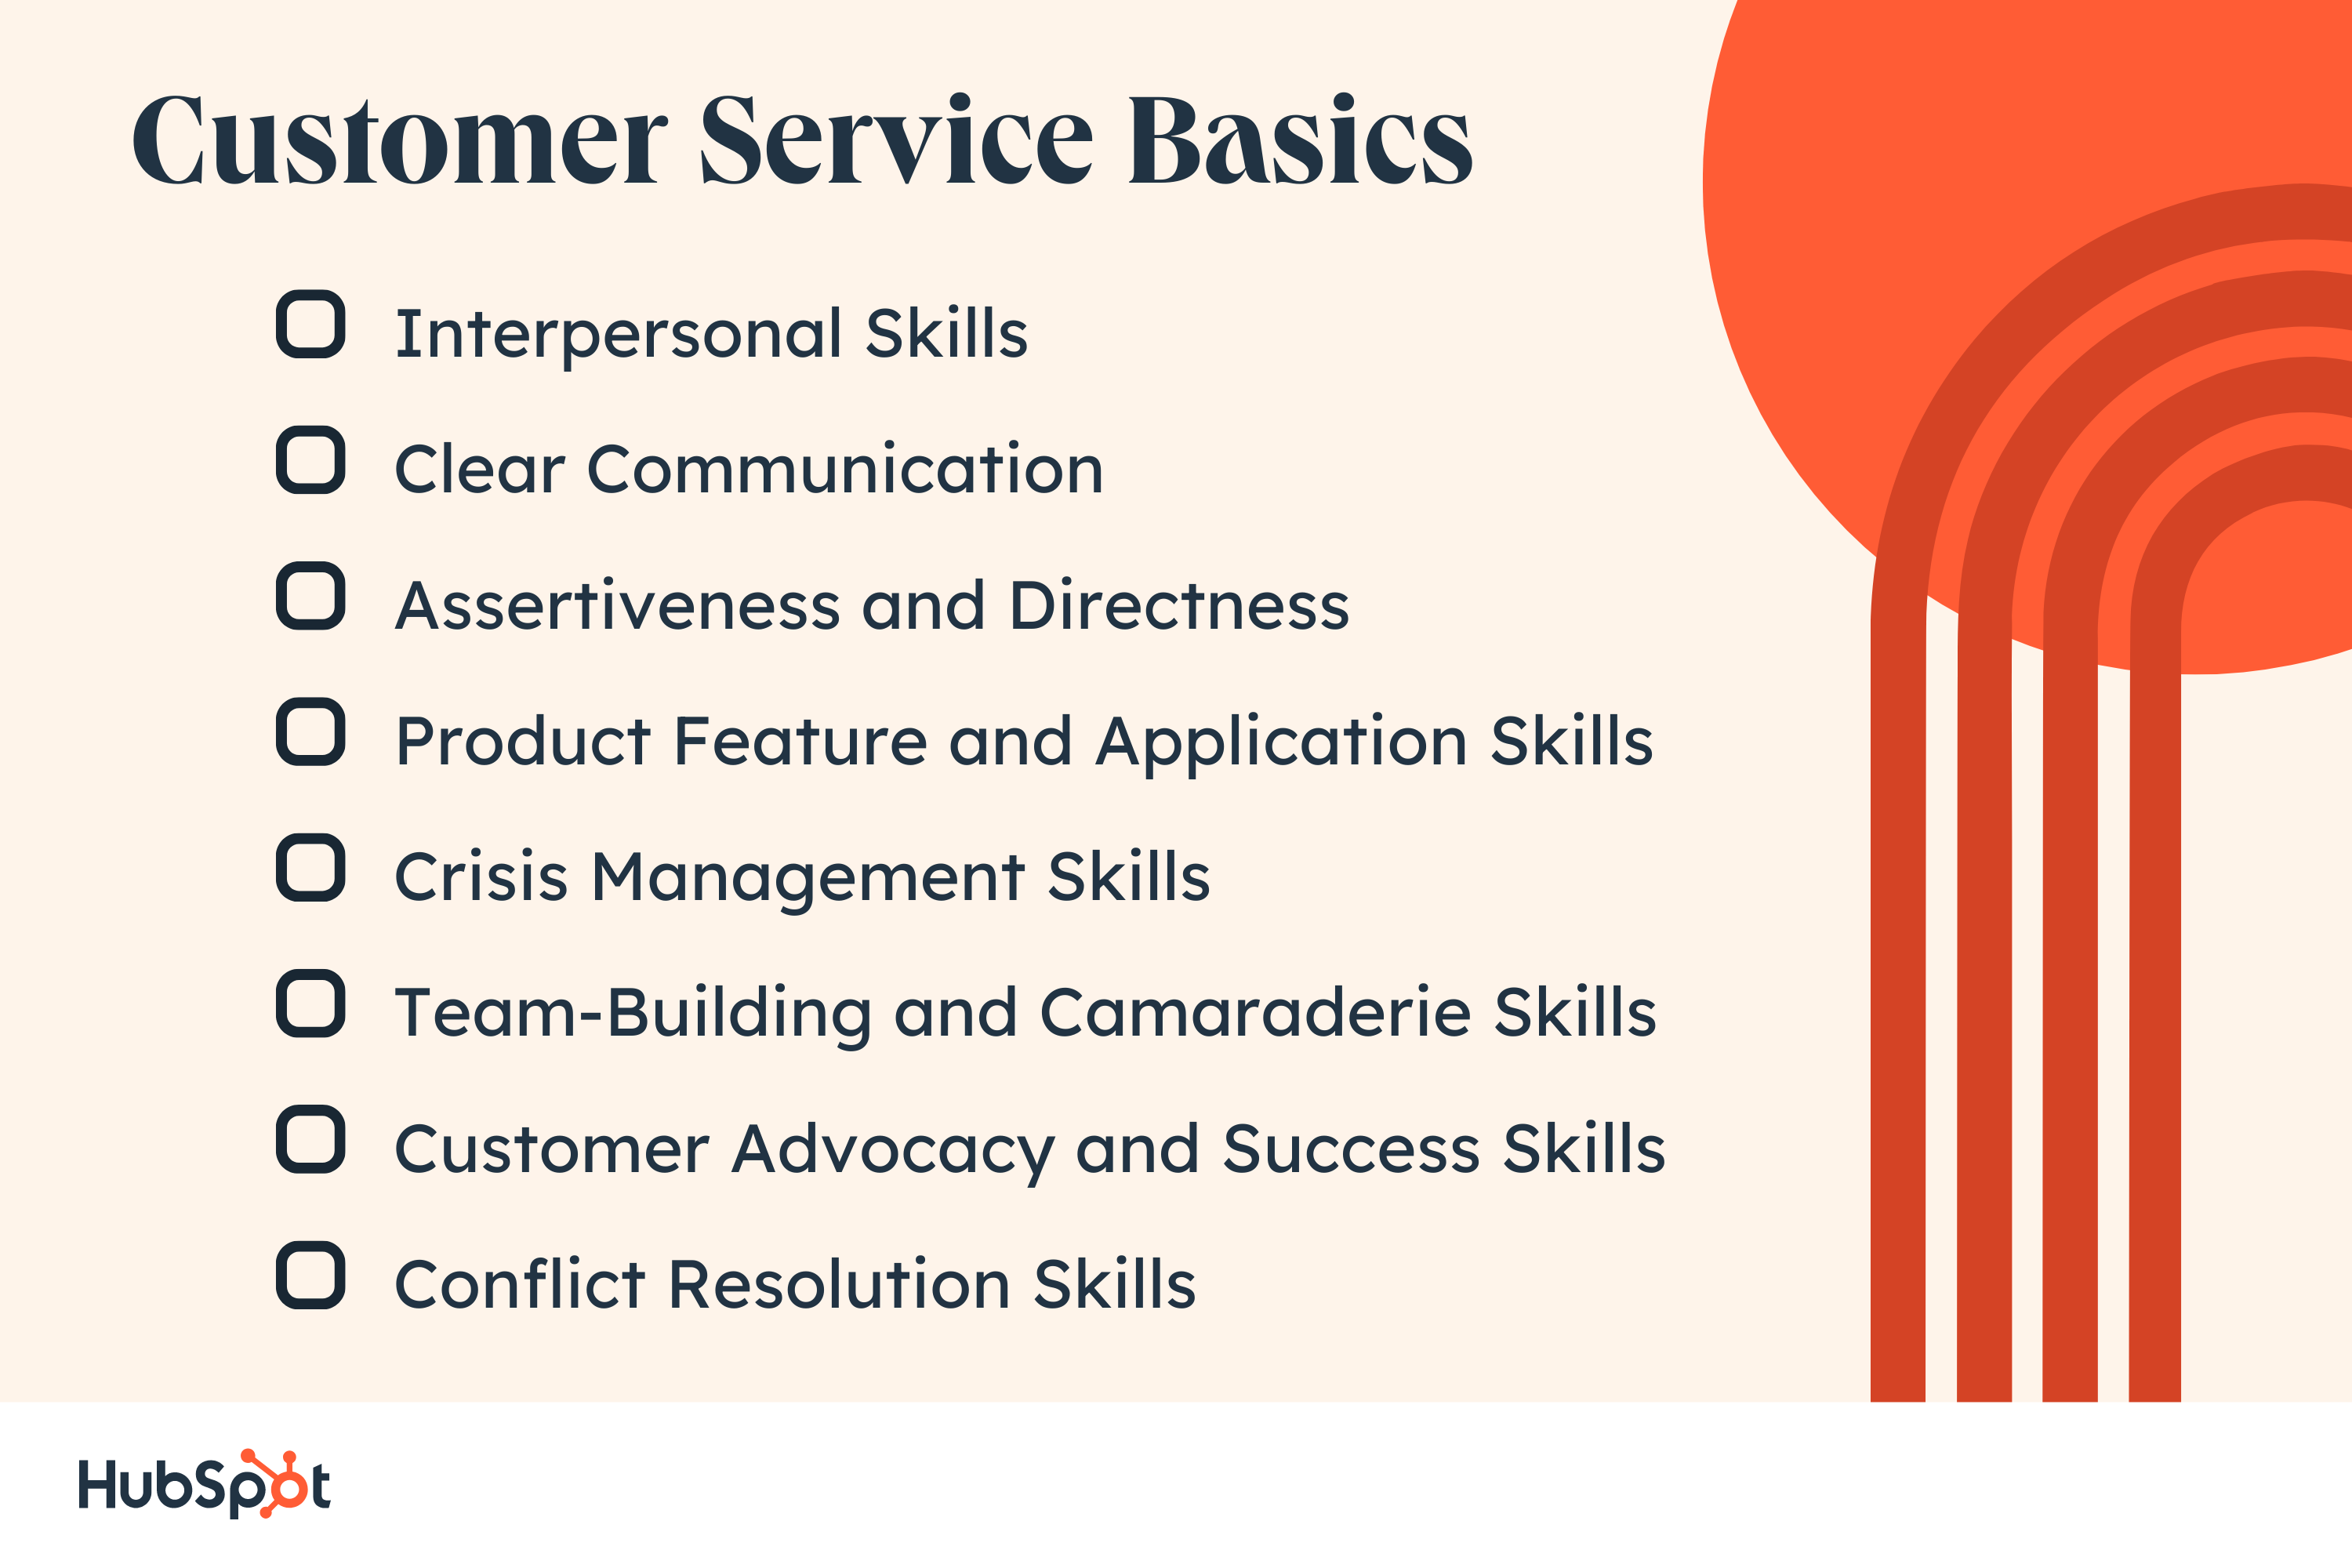 Customer Service Basics. Interpersonal Skills. Clear Communication. Assertiveness and Directness. Product Feature and Application Skills. Crisis Management Skills. Team-Building and Camaraderie Skills. Customer Advocacy and Success Skills. Conflict Resolution Skills